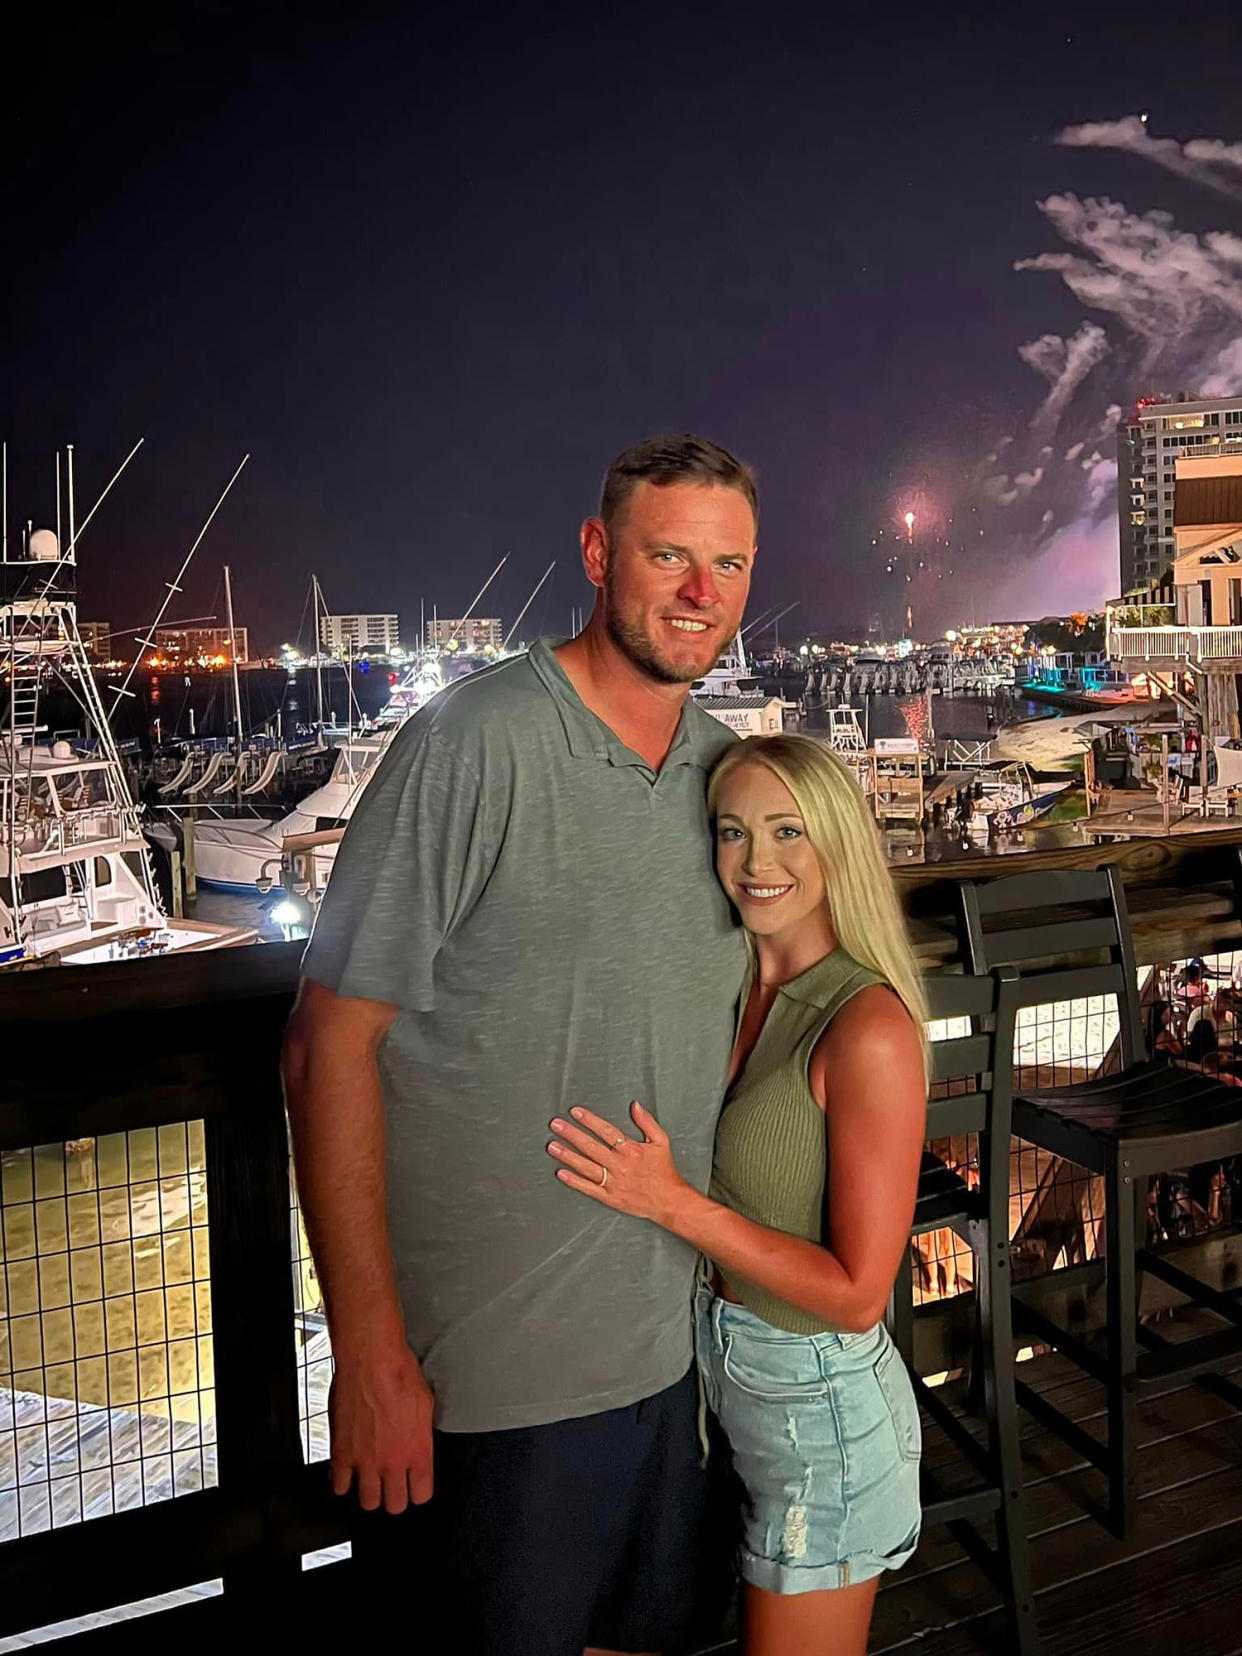 Ryan Mallett Girlfriend Madison Carter Shares Tribute to Late Athlete After His Death